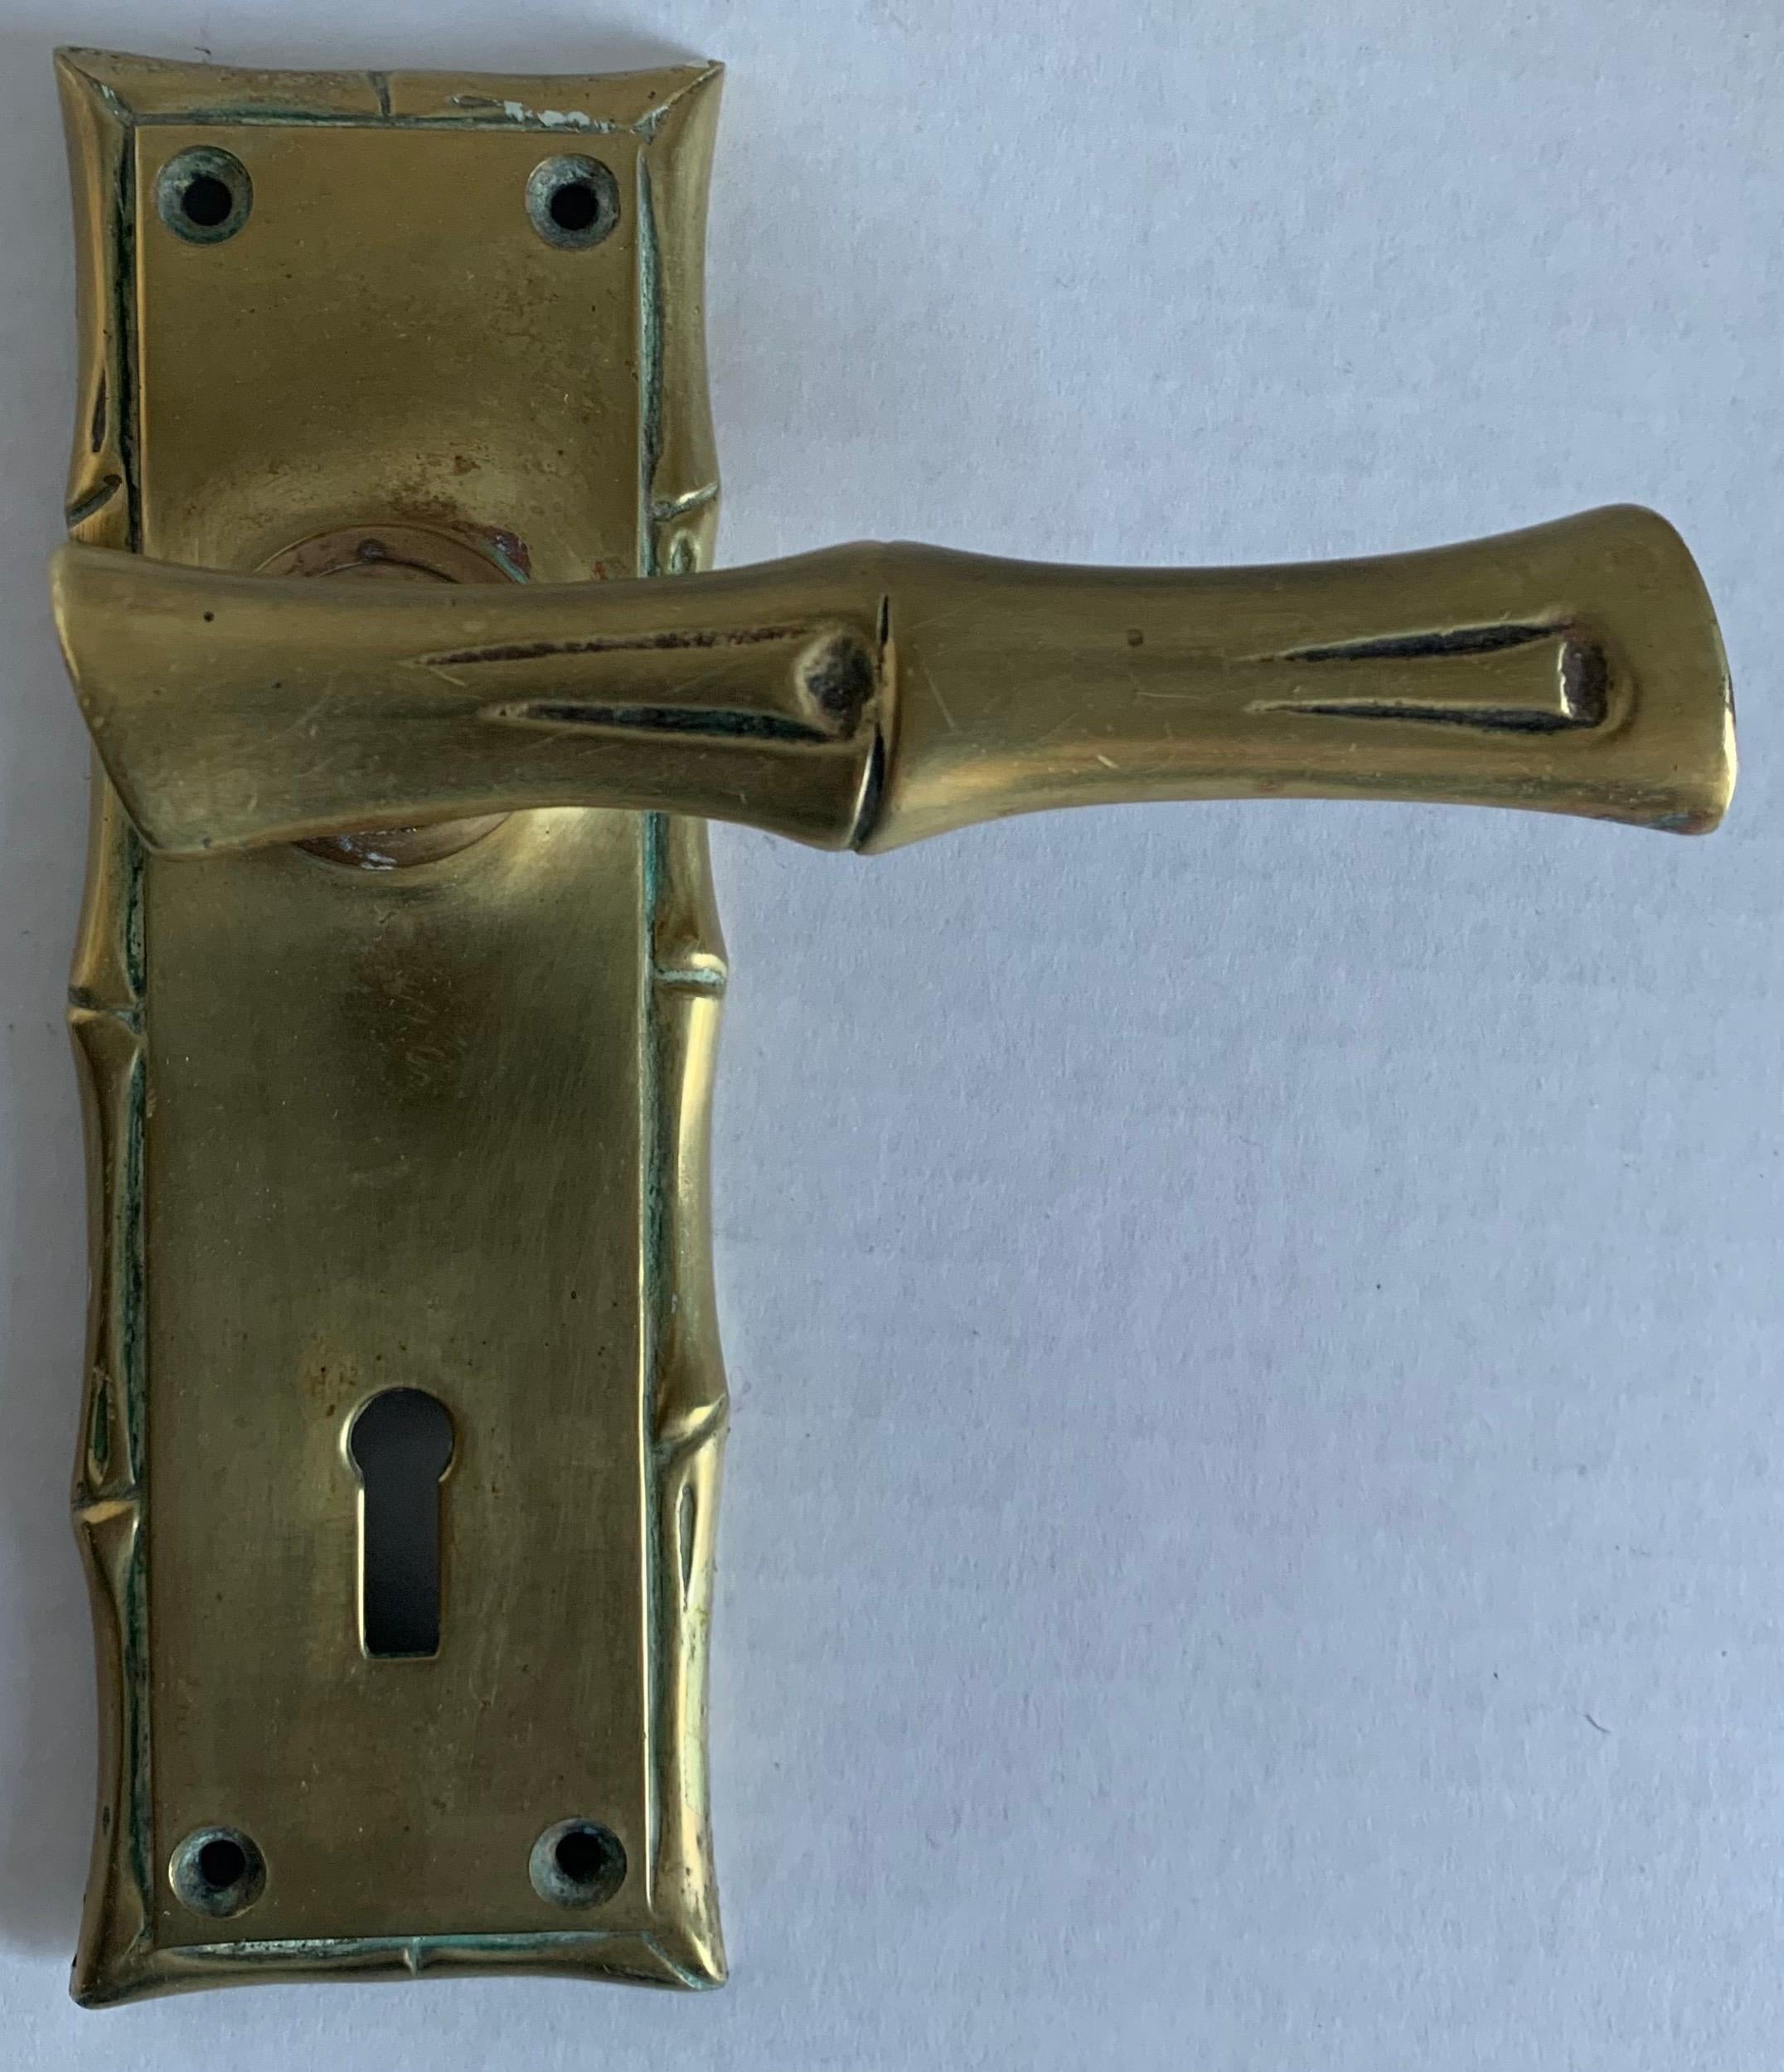 Single cast brass faux bamboo door handles. Right facing door handle. Faux bamboo handle is 4” wide. Backplate is 6” tall x 2” wide x 2” deep. Installation hardware not included. Overall unpolished patina. Can be re-plated in brass or nickel for an